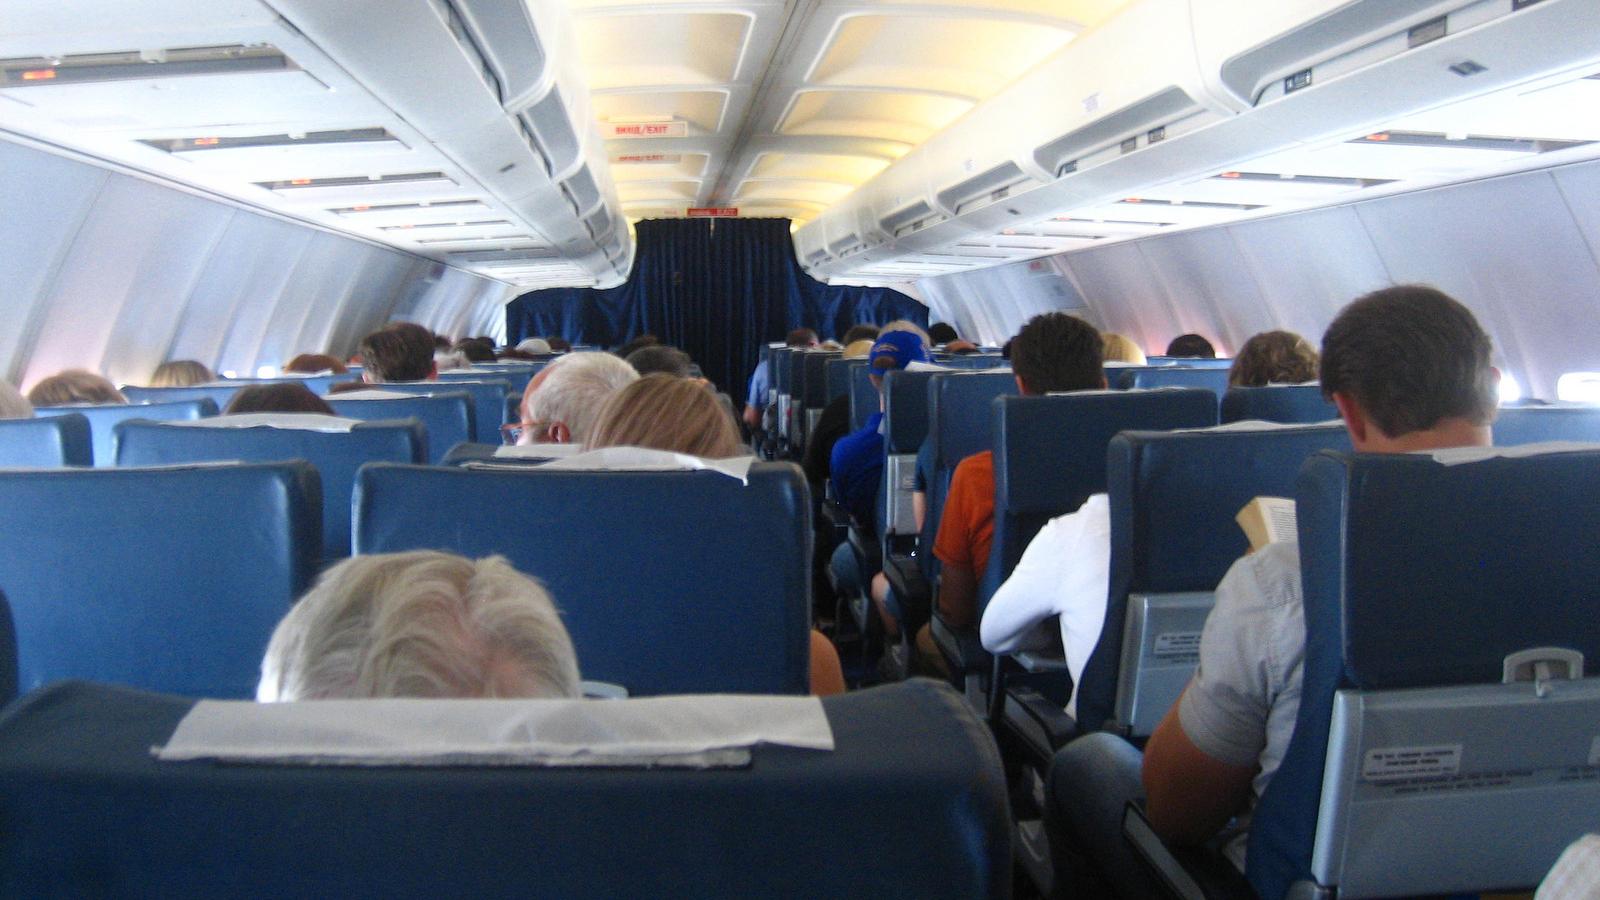 Since the inception of commercial air travel, the insides of airplane cabins have been associated with a higher likelihood of catching a cold or other spreadable disease. New research has sought out to see if scientific facts back up those sentiments. 